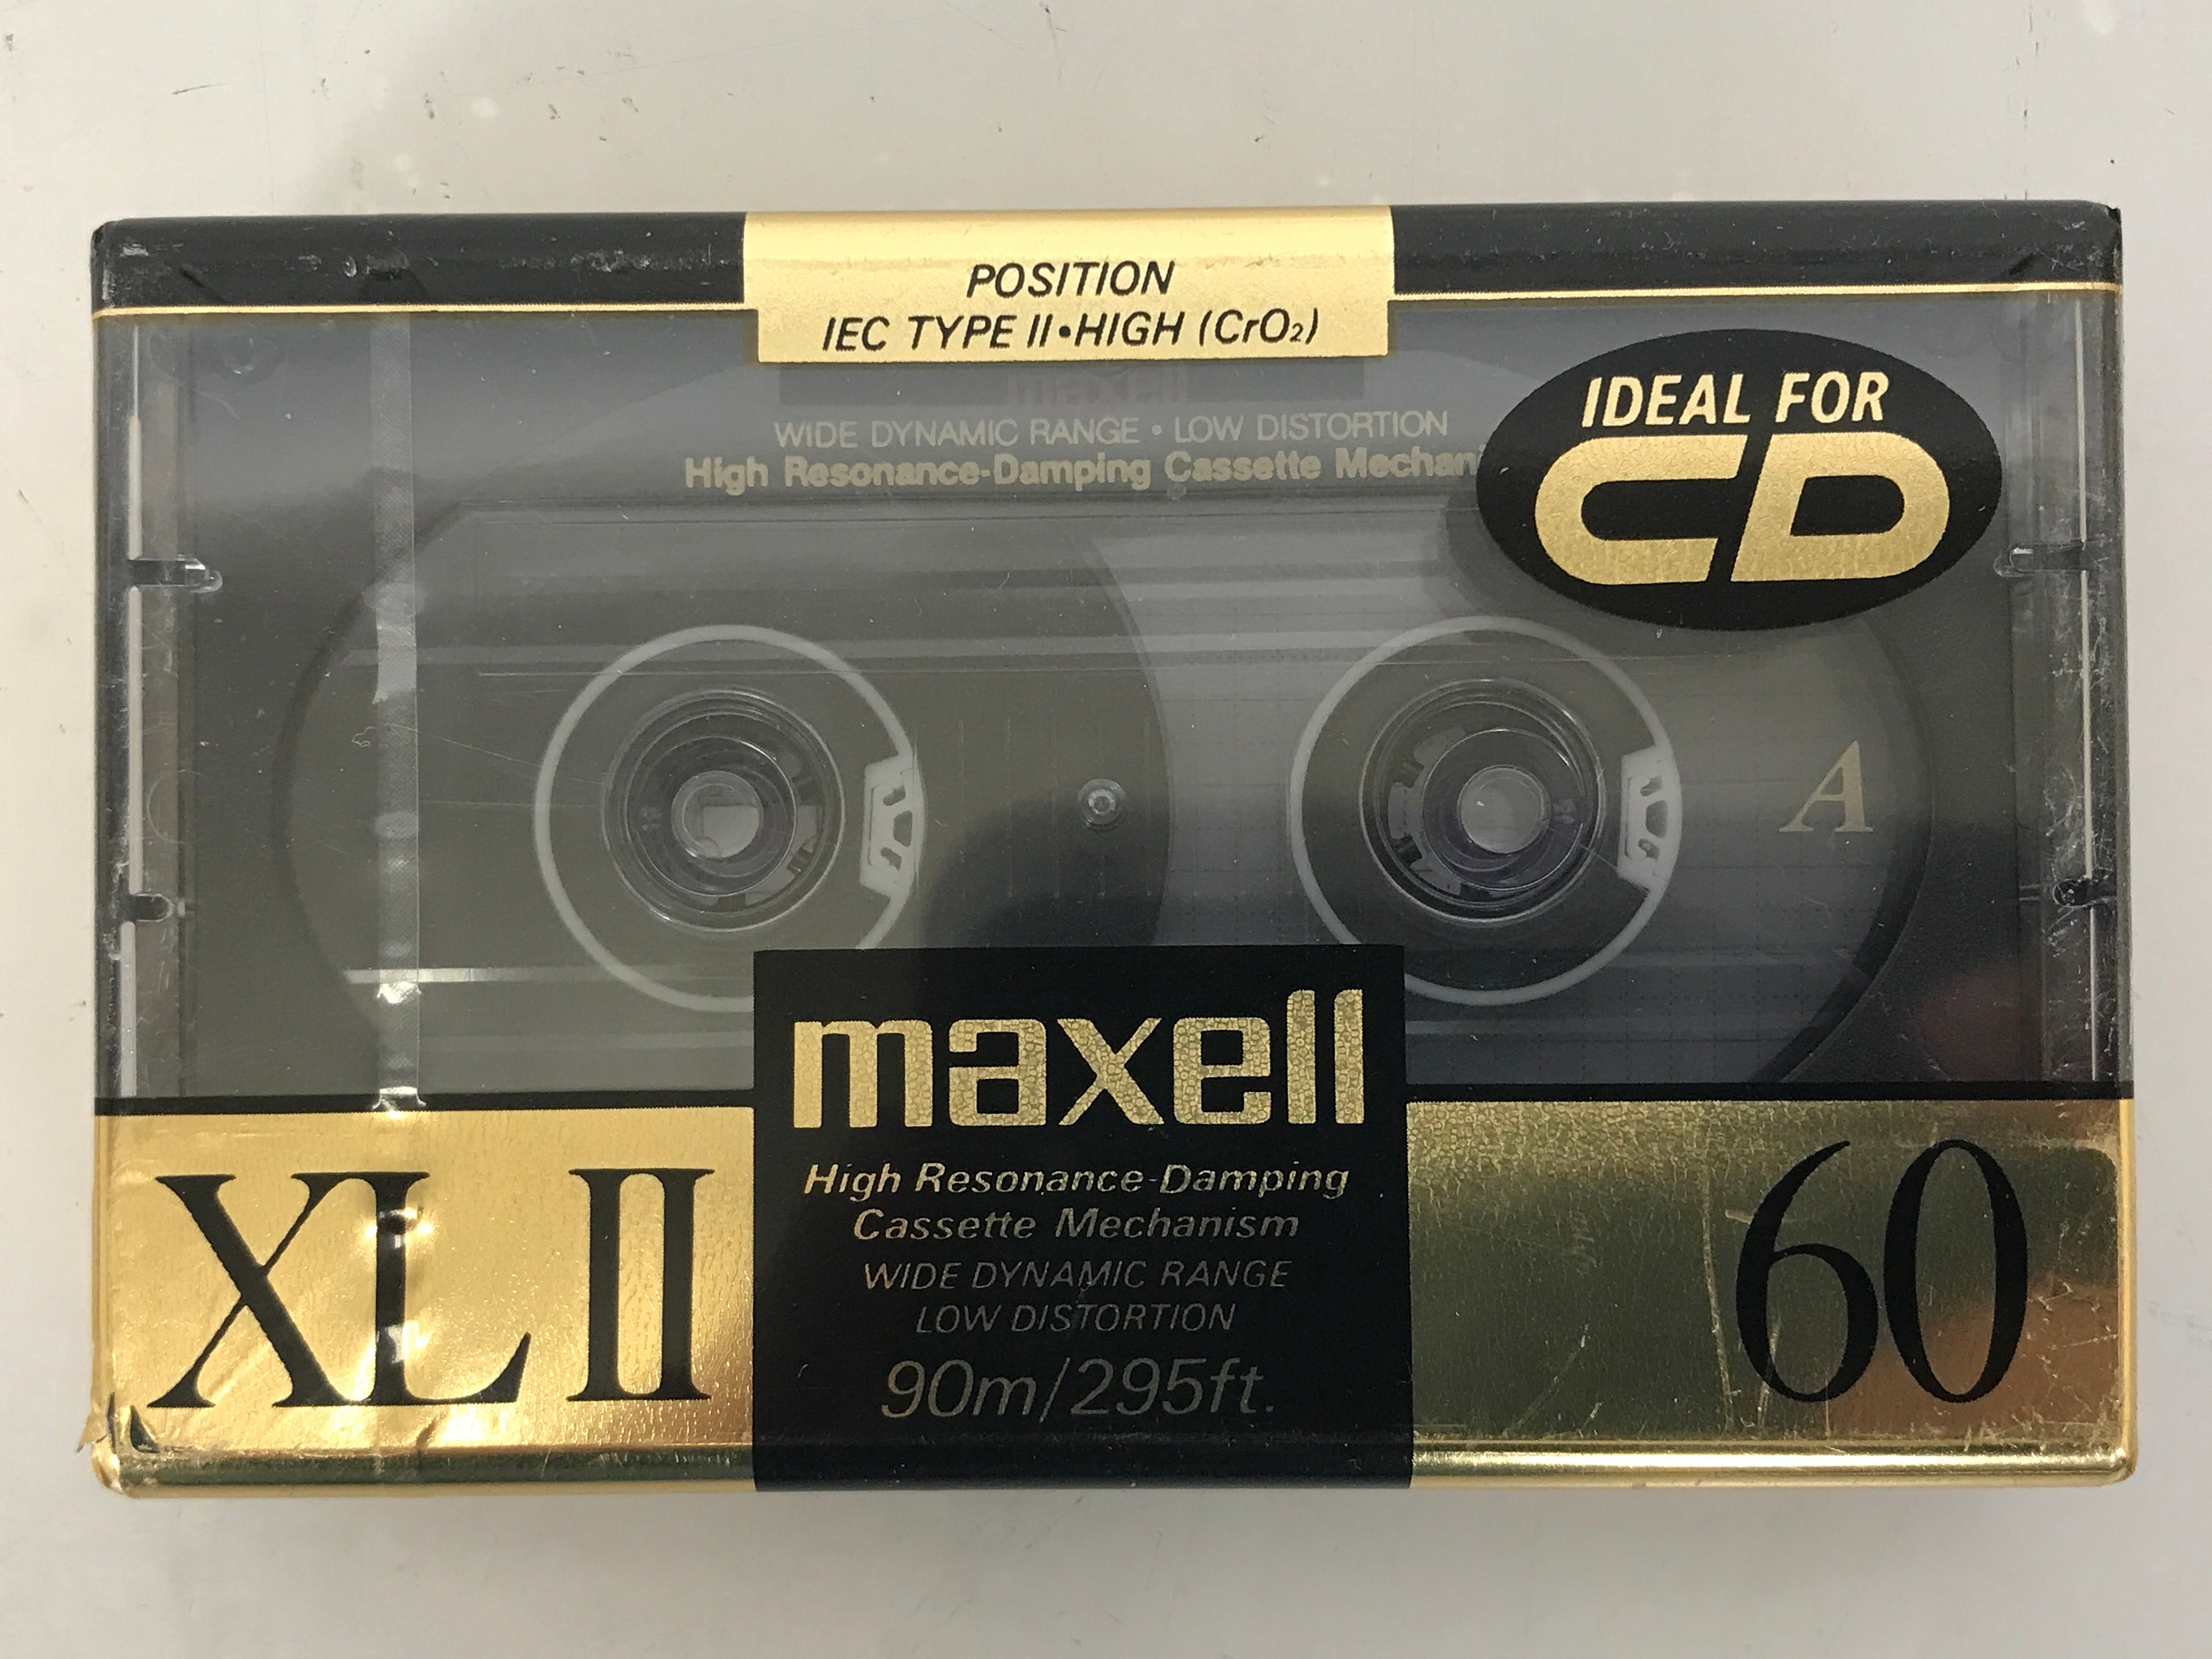 MAXELL XLI 60 Min Audio Cassette Tape (Sealed) Made in Japan $65.00 -  PicClick